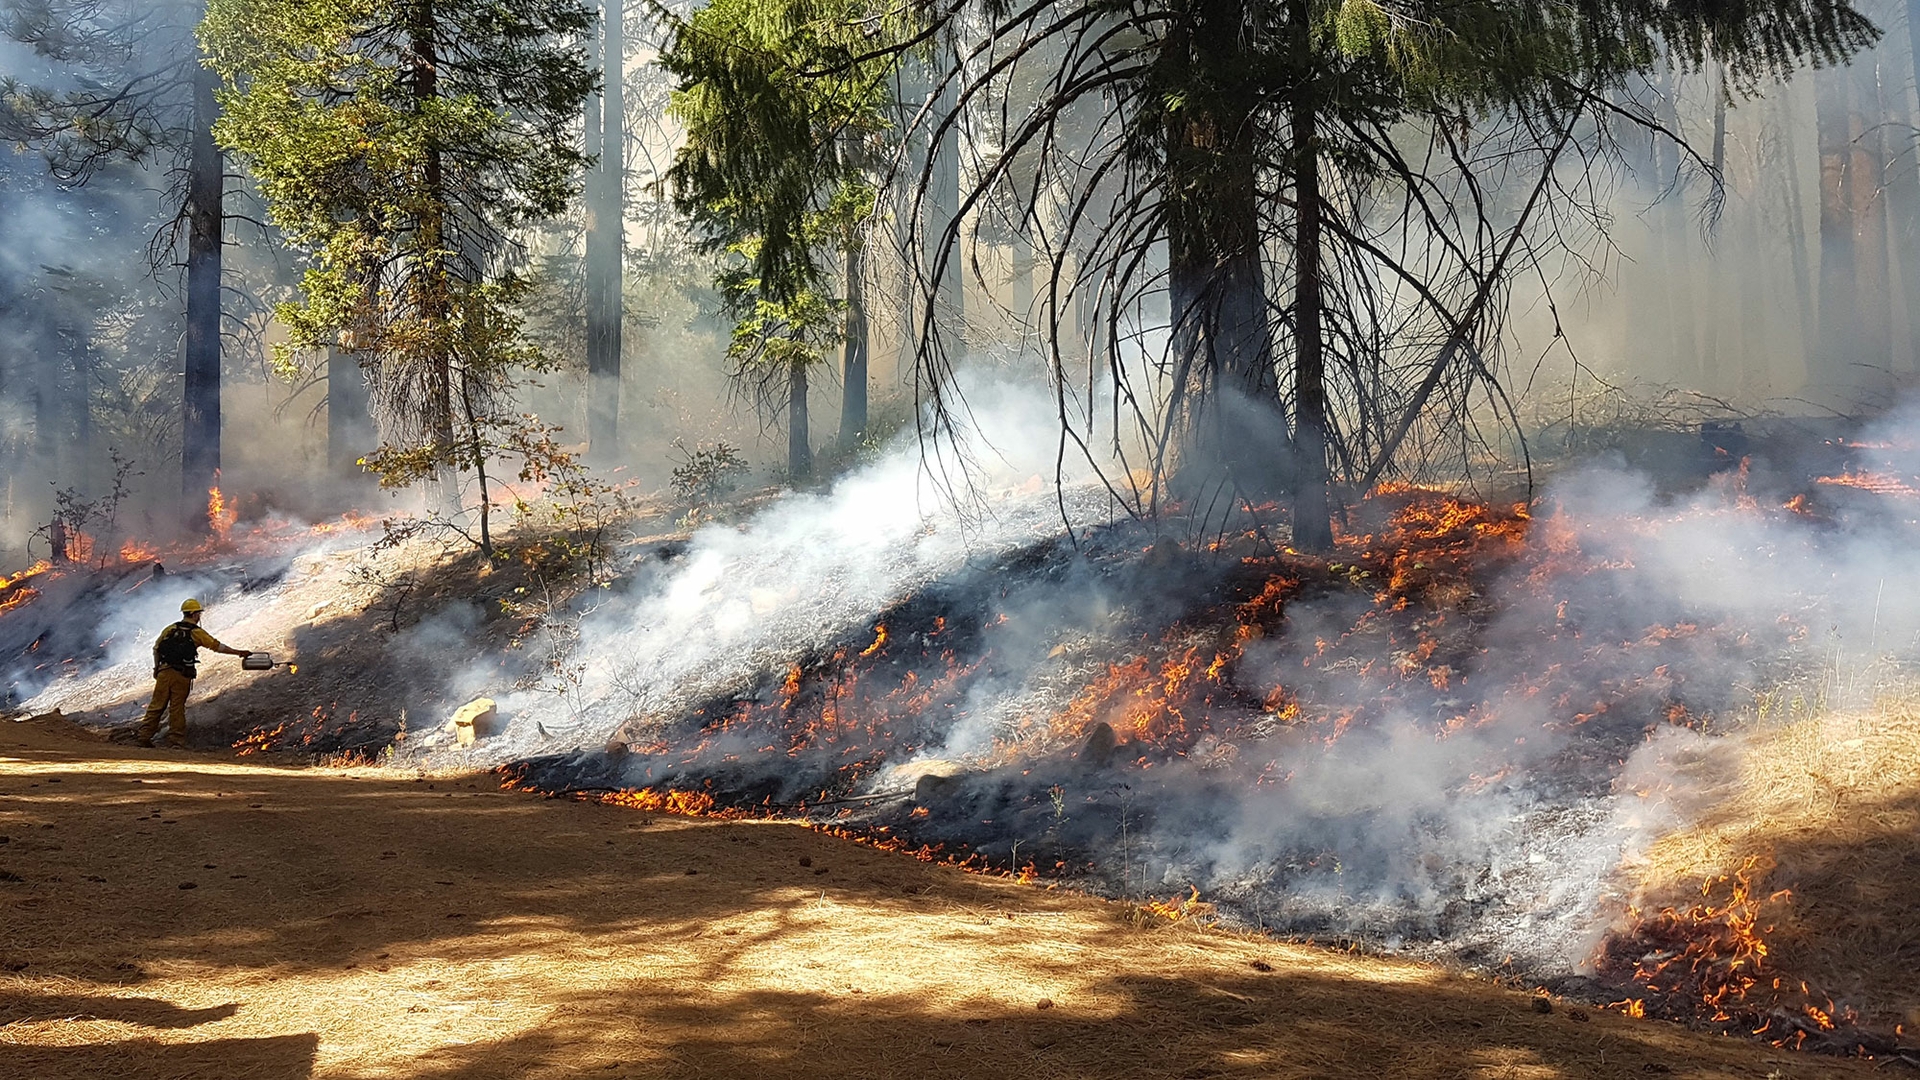 A photo of a prescribed burn in a conifer forest. The fire burns across the forest floor, generating flames and smoke, but does not extend into the branches of the trees. In the distance, a person wearing yellow fire protection gear is holding out a drip torch.